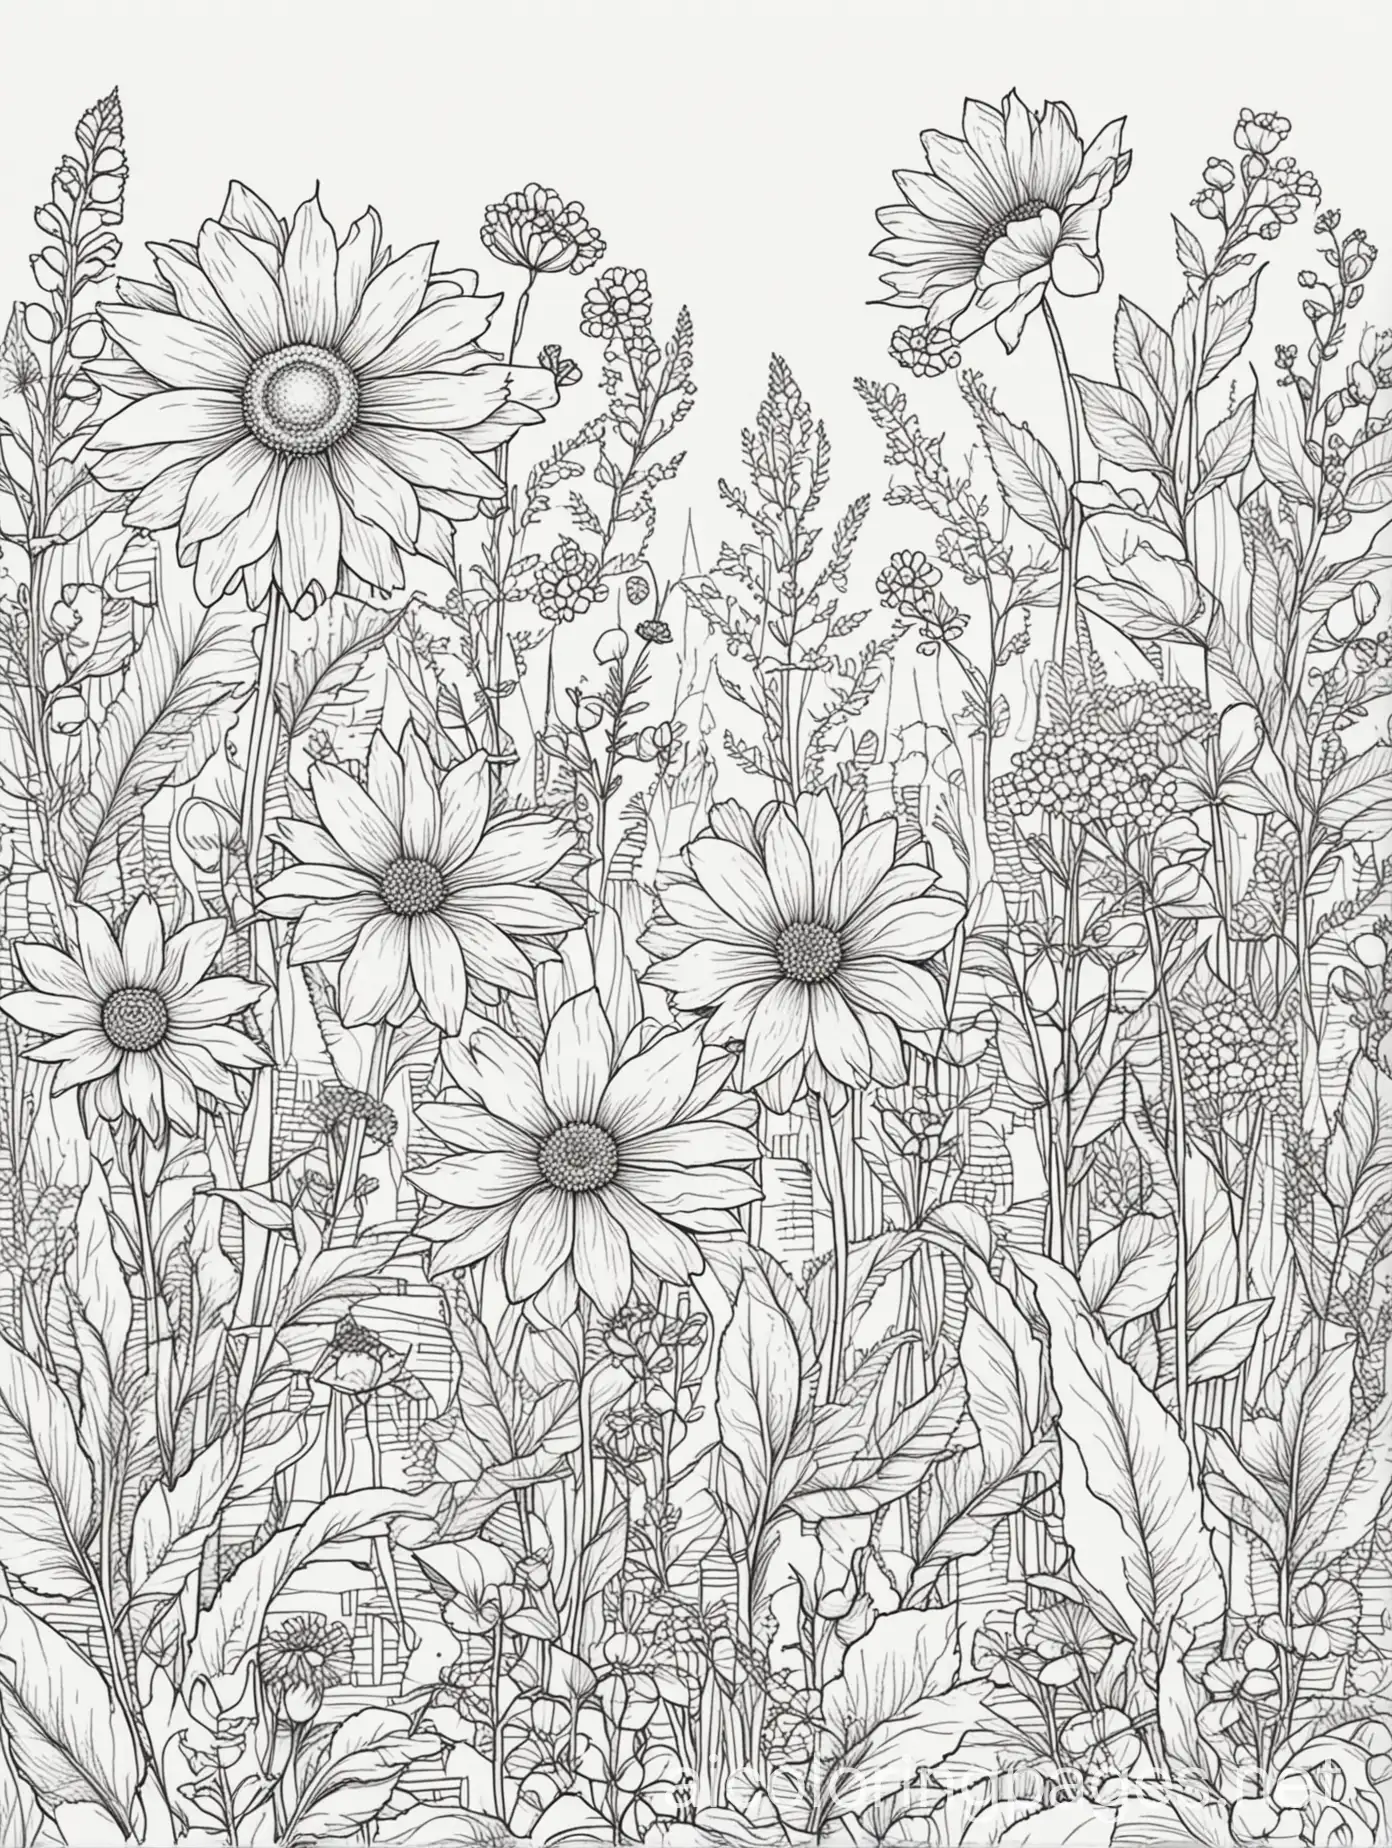 colouring page, wildflowers, adorable, cute, Coloring Page, black and white, line art, white background, Simplicity, Ample White Space. The background of the coloring page is plain white to make it easy for young children to color within the lines. Thick outlines. The outlines of all the subjects are easy to distinguish, making it simple for toddlers to color without too much difficulty, Coloring Page, black and white, line art, white background, Simplicity, Ample White Space. The background of the coloring page is plain white to make it easy for young children to color within the lines. The outlines of all the subjects are easy to distinguish, making it simple for kids to color without too much difficulty